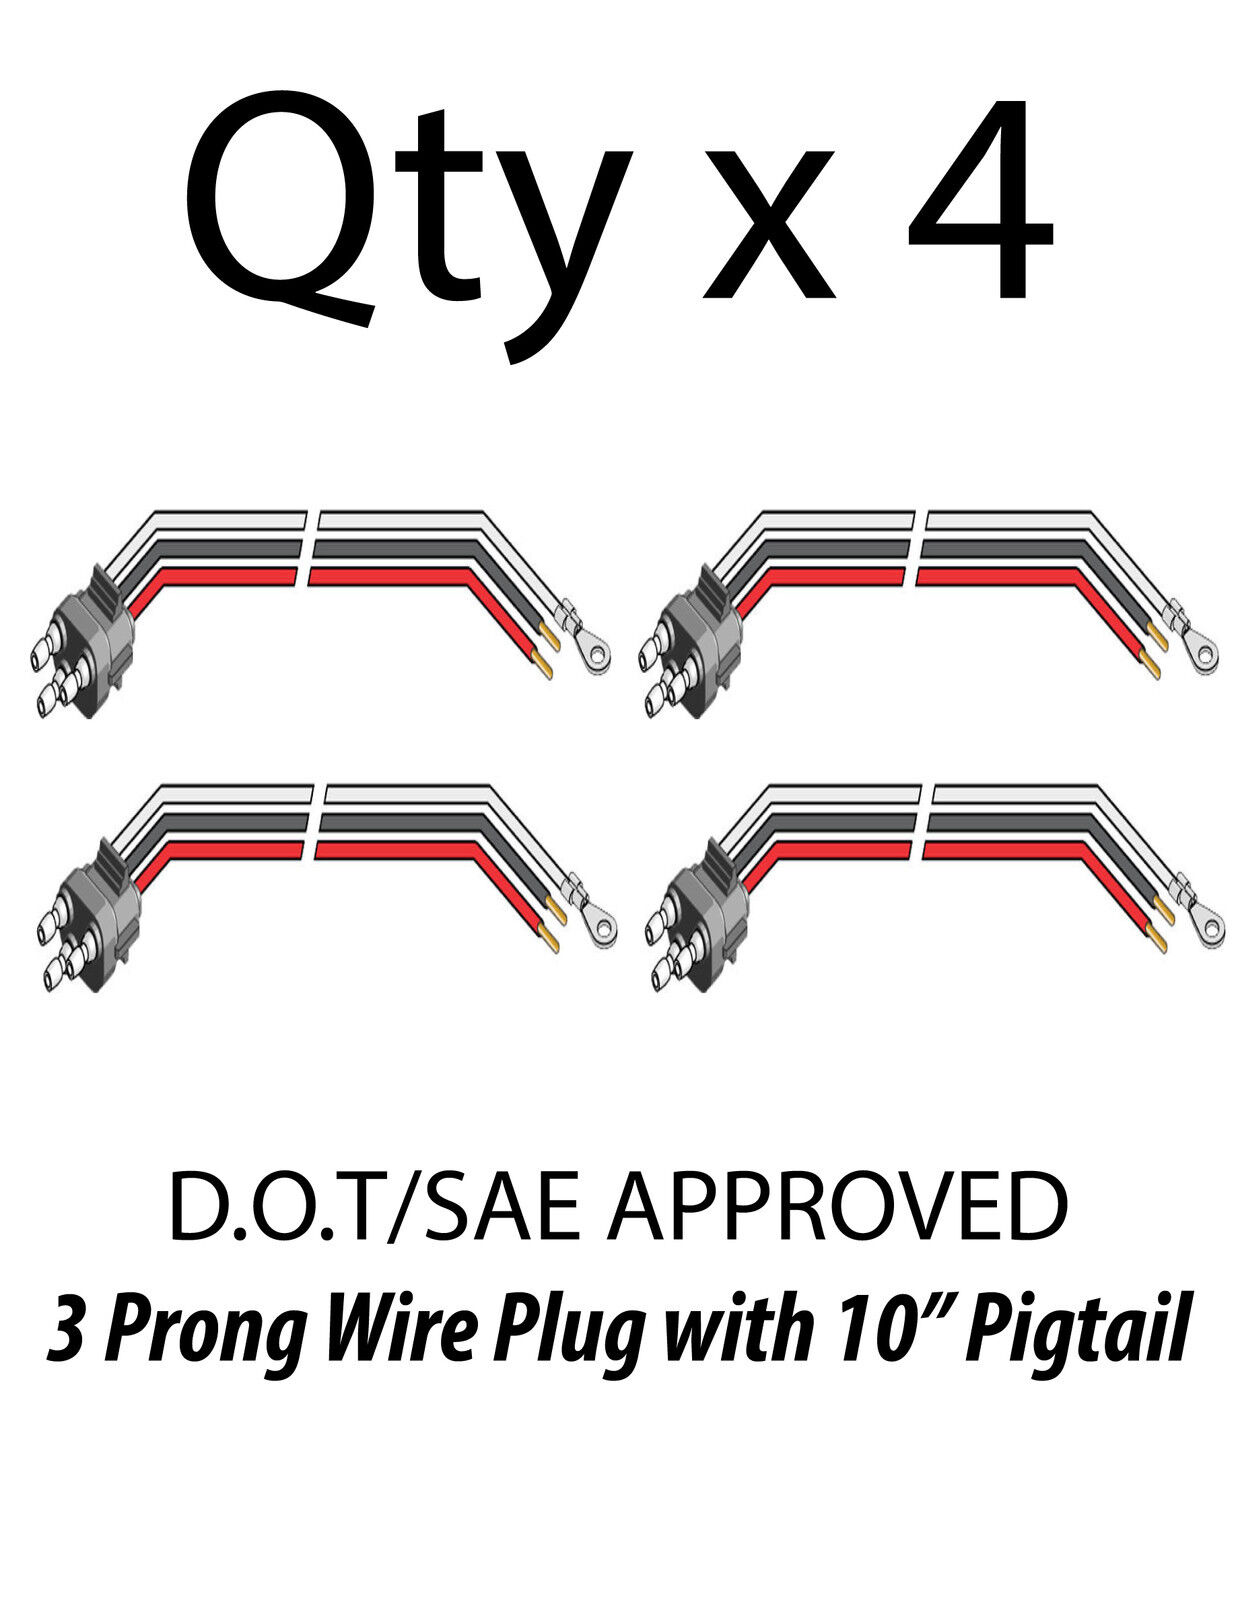 3 Prong Pigtail Wire Plug for Truck Trailer Stop Turn Tail Lights - Qty 4